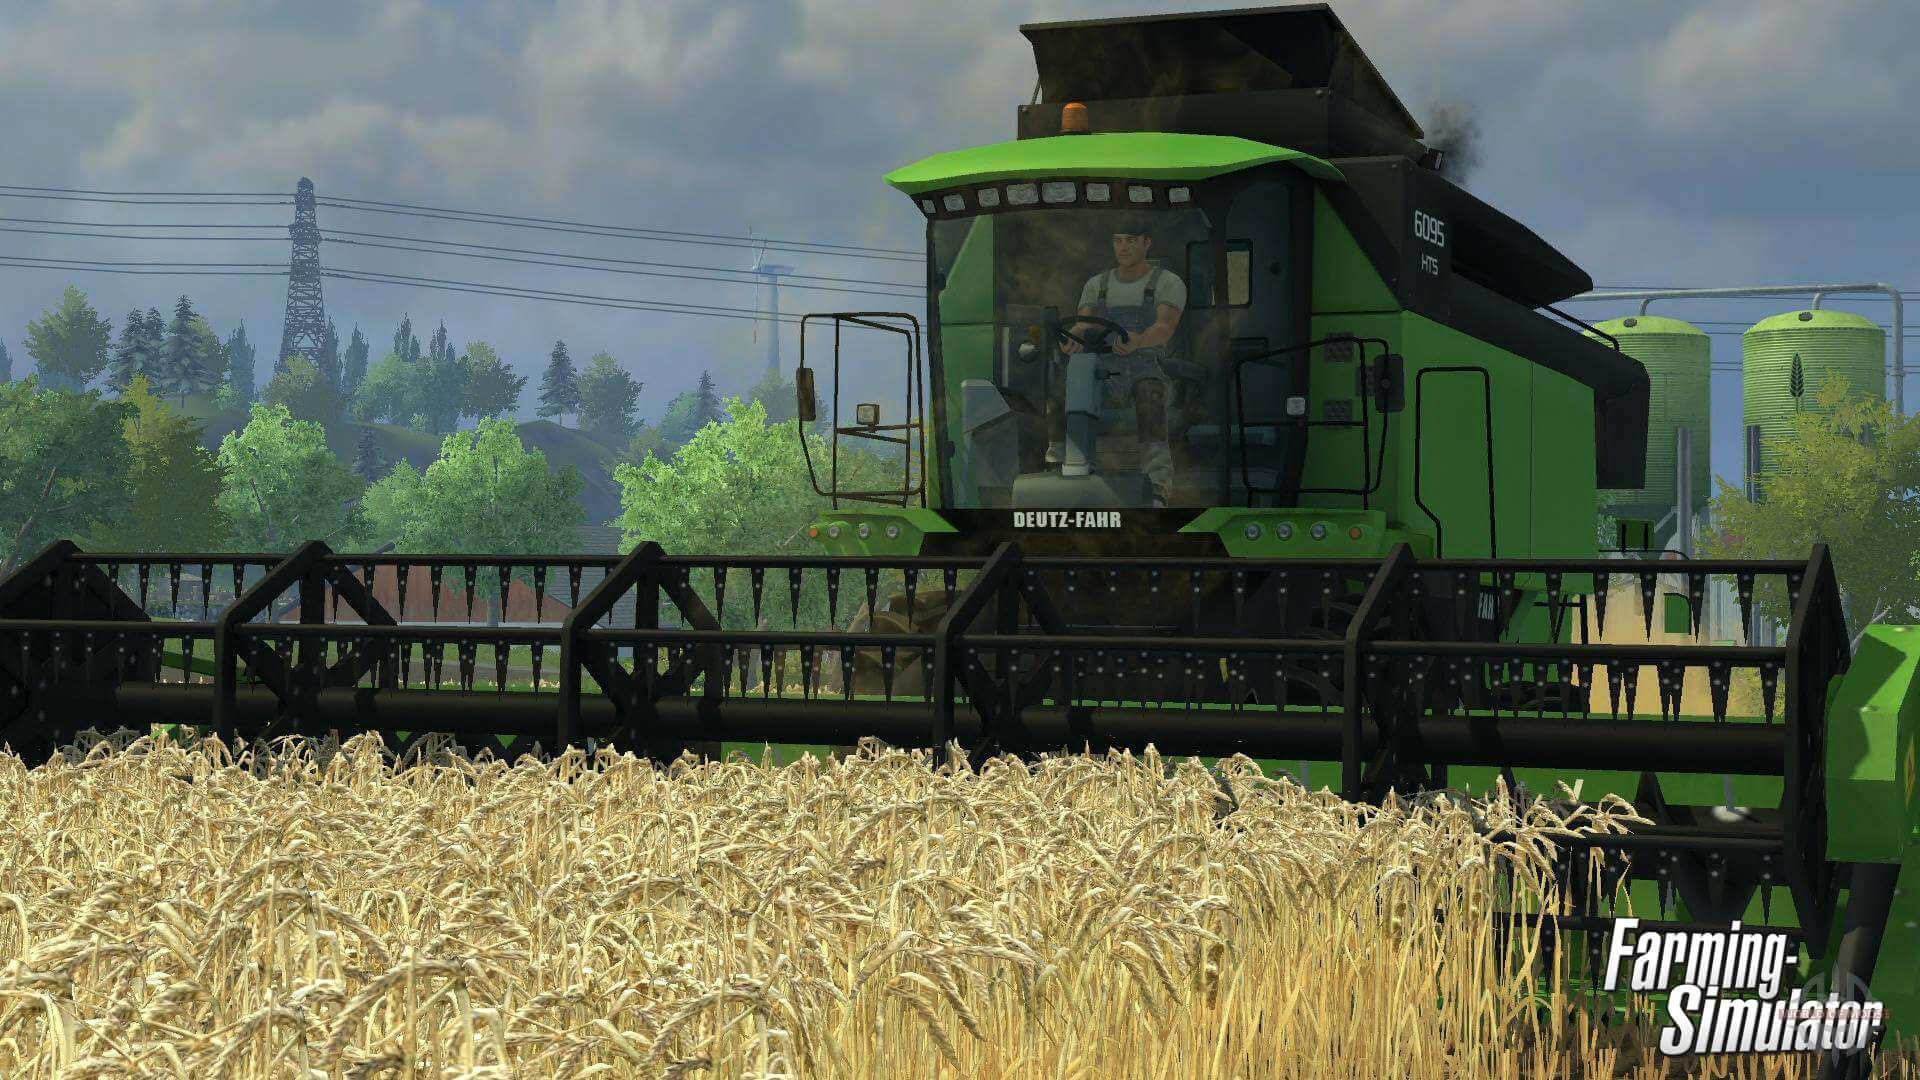 Download Farming Simulator 13 Highly Compressed Full PC Game in 417 MB Only !! - TraX Gaming Center